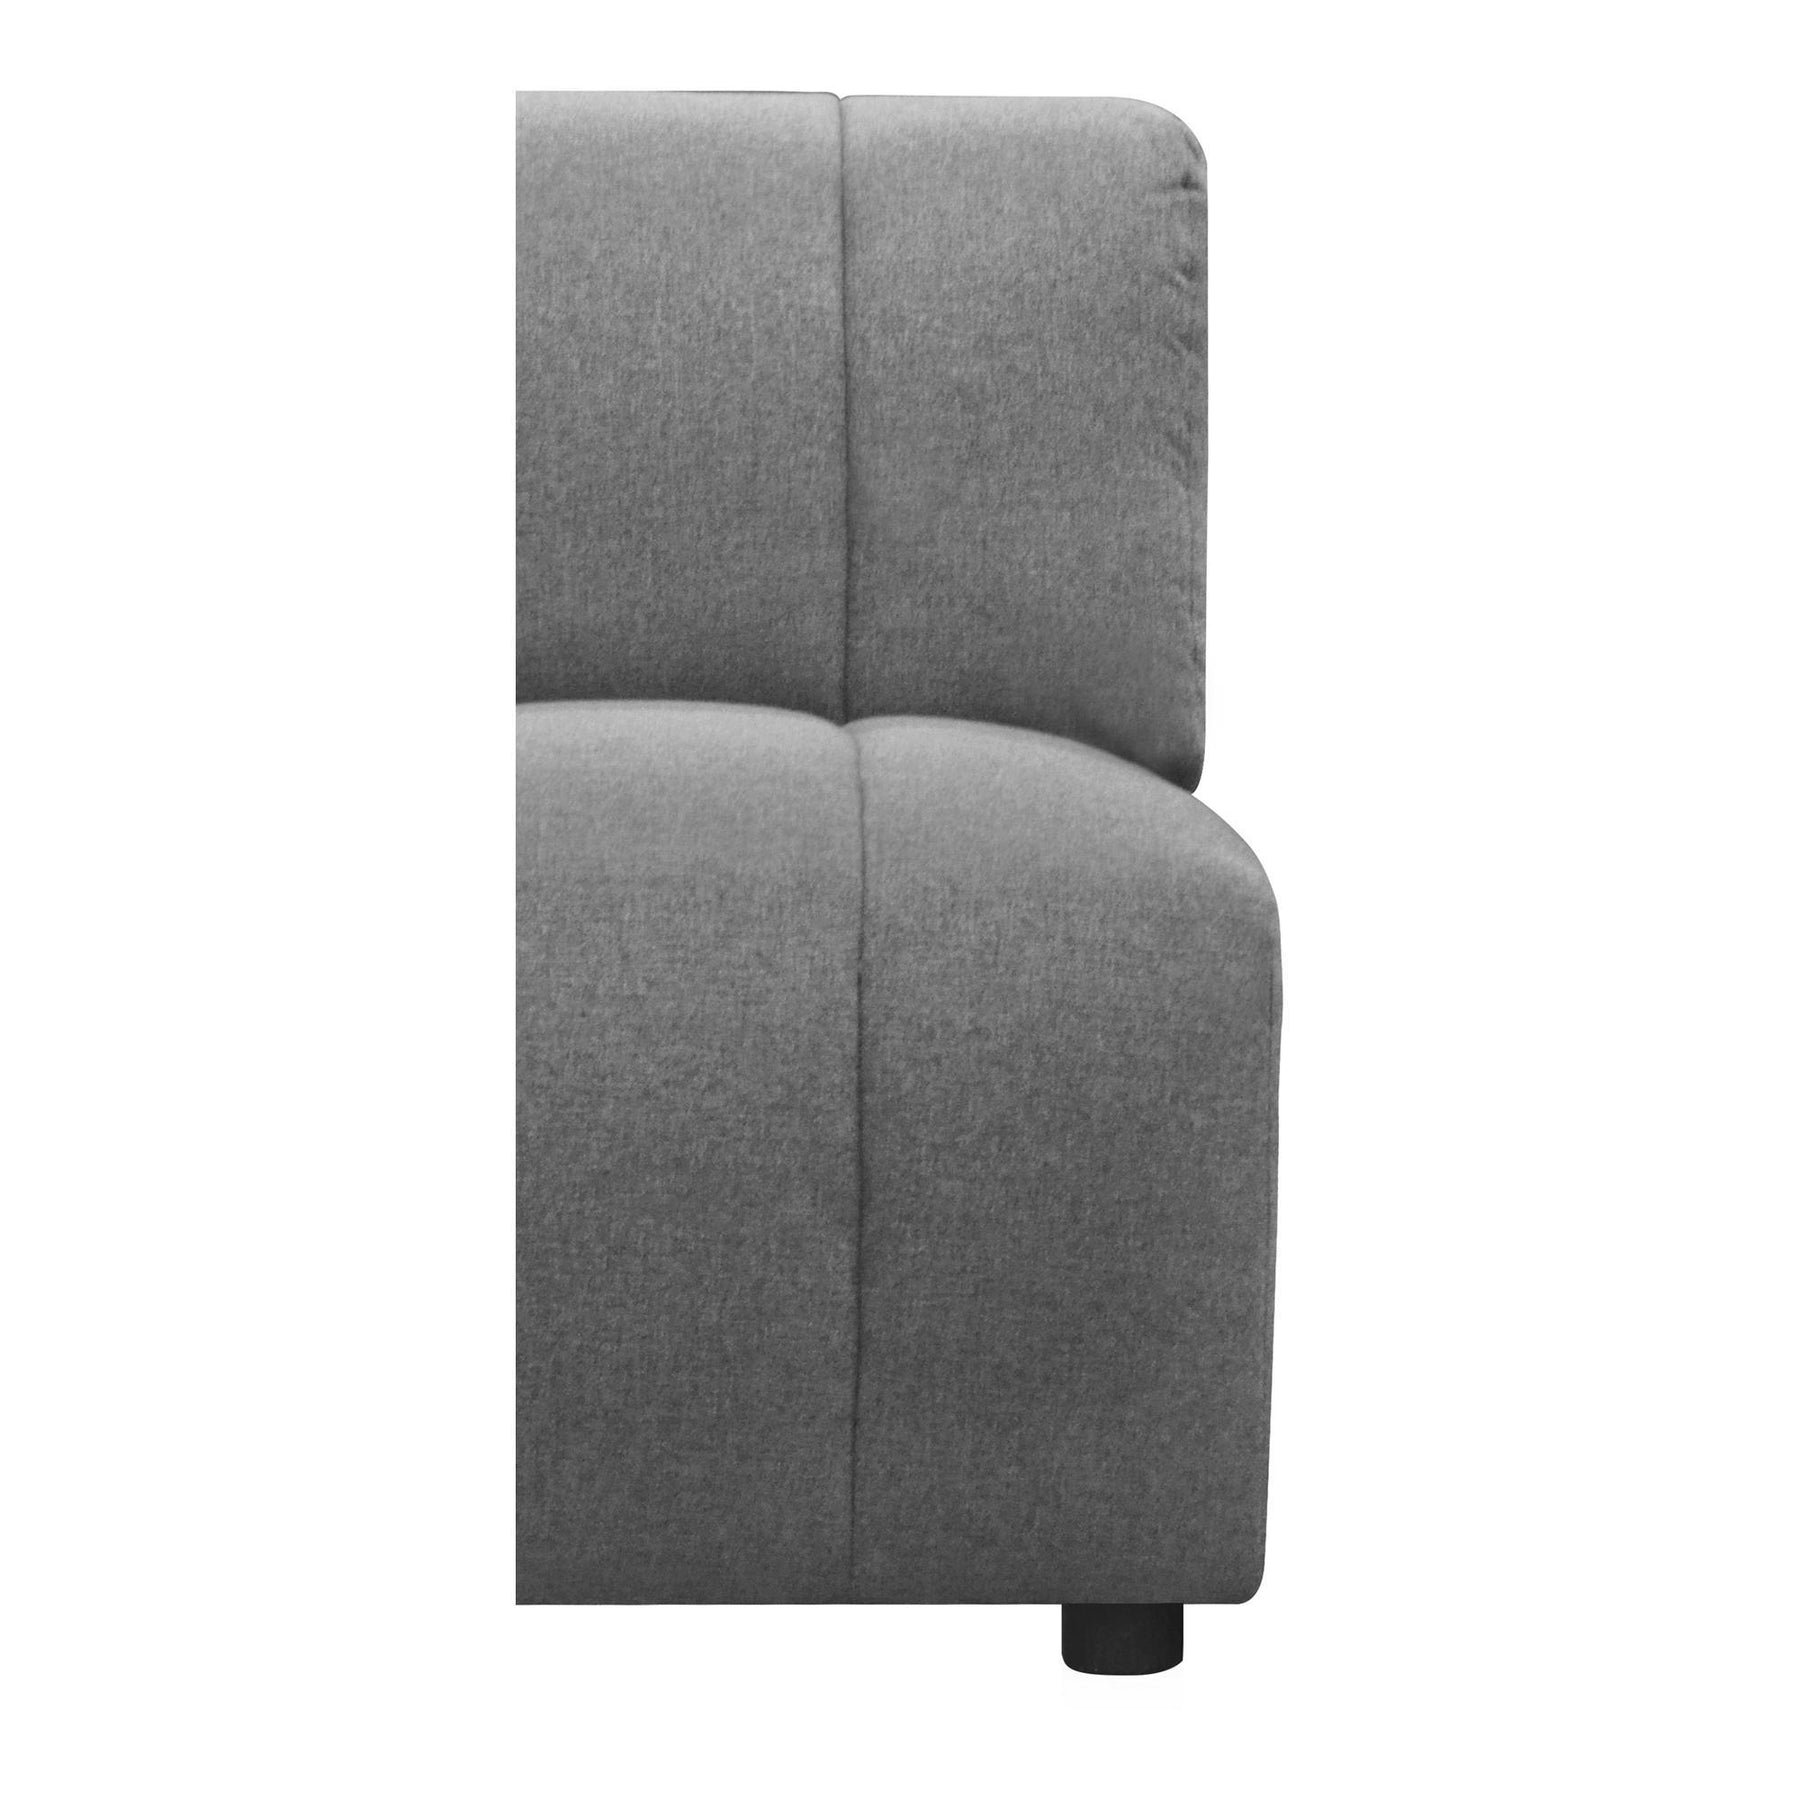 Moe's Home Collection Lyric Slipper Chair Grey - MT-1024-15